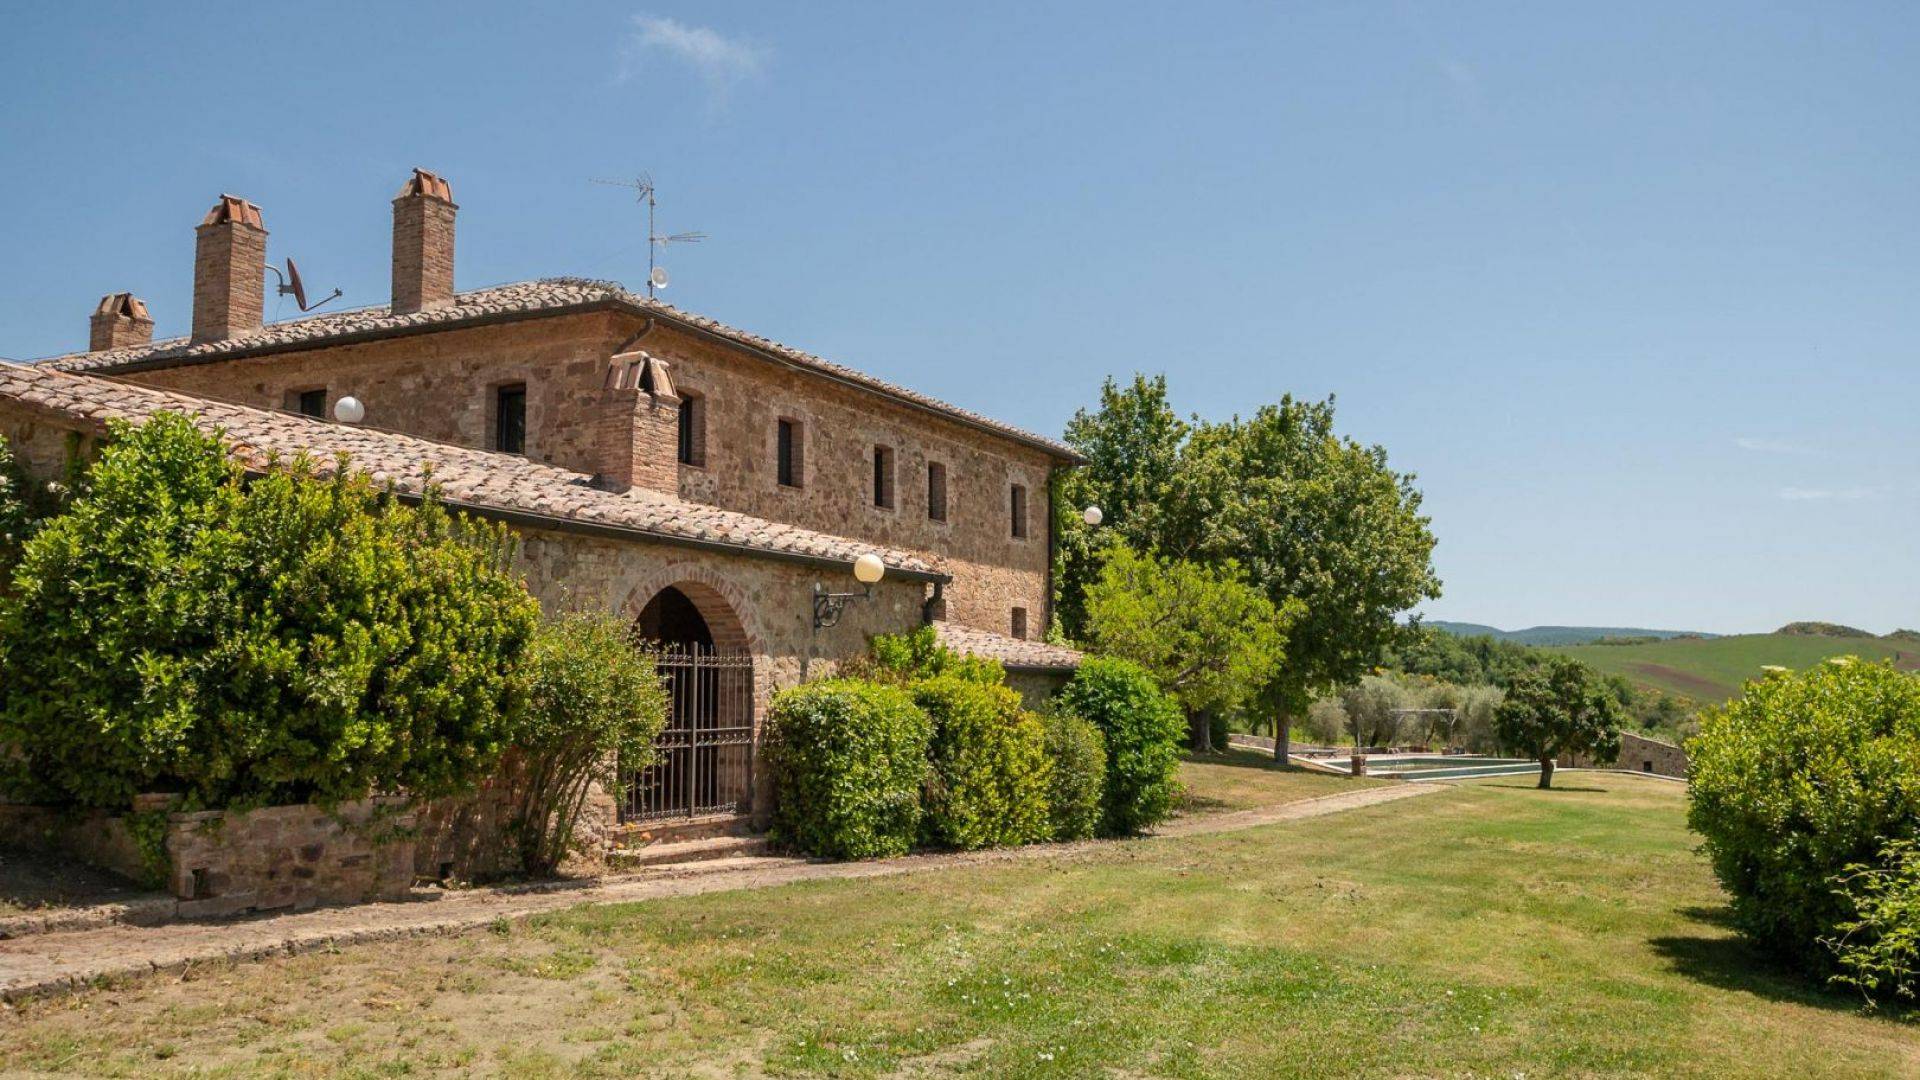 Exclusive sale: fully restored charming stone country house with pool, olive grove and land in Val d’Orcia,  close to the town of Pienza, Siena.